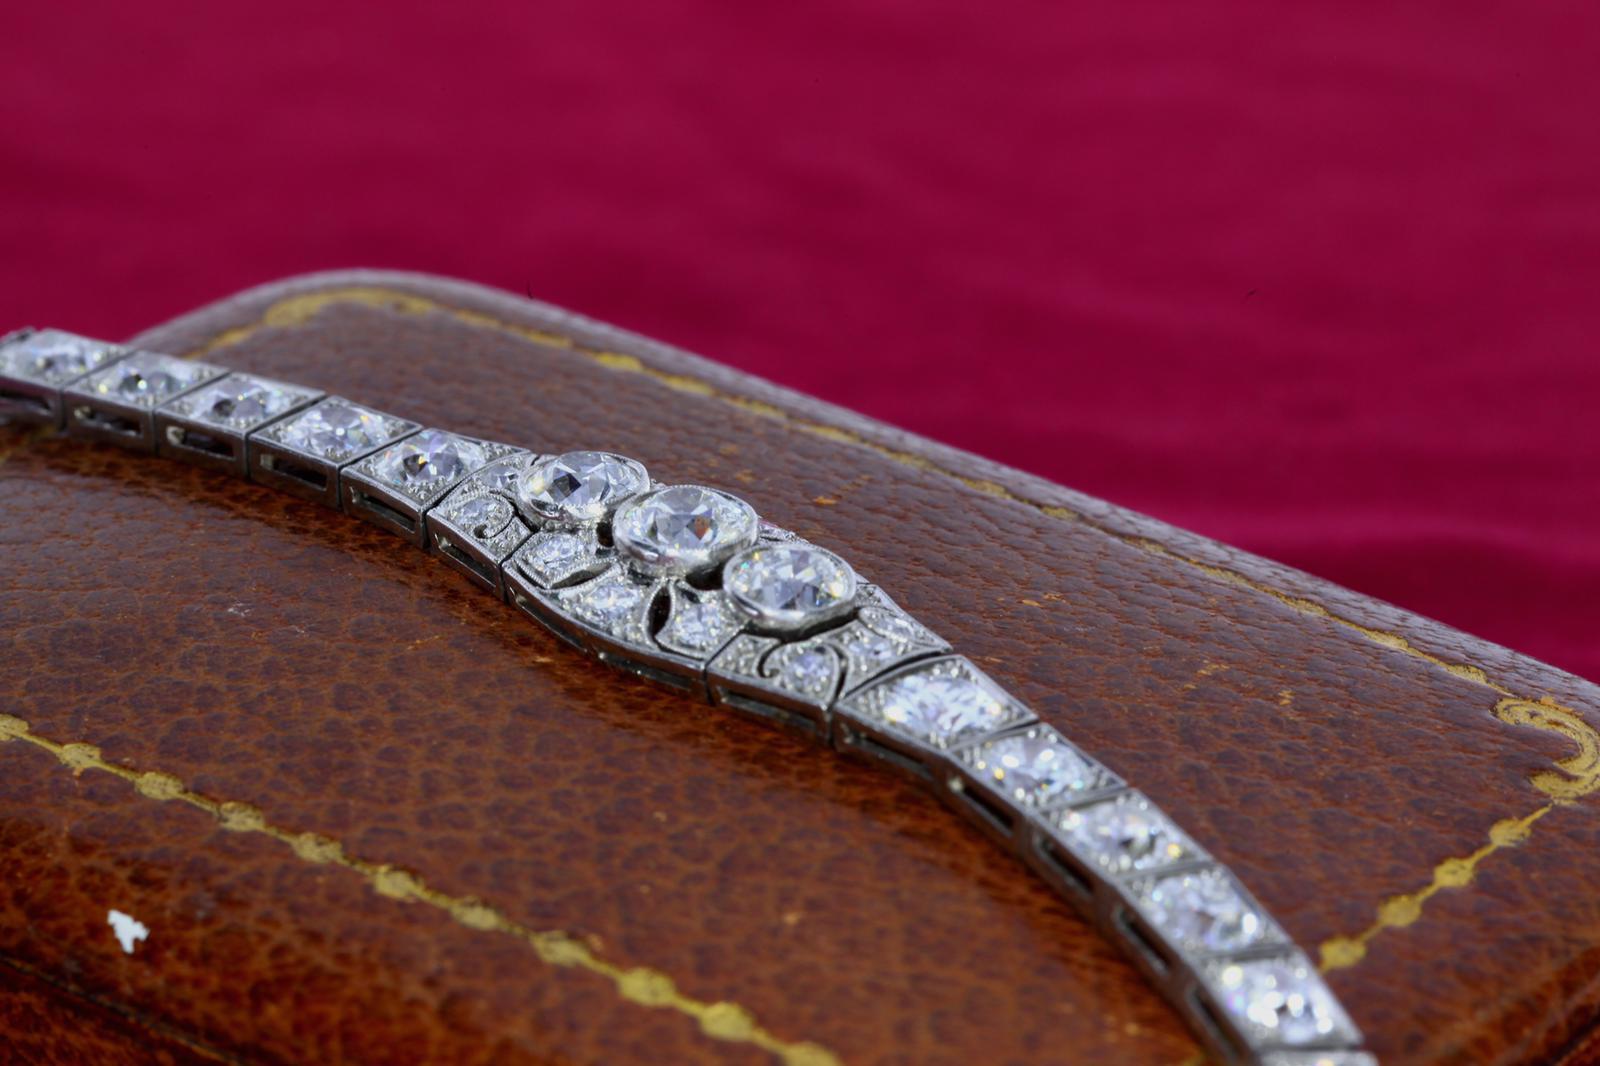 Approximately 9 carats of diamonds set in an art nouveau french made platinum bracelet from the 1940s. The diamonds display the typical cutting style from the era with high crowns and nice luster. 